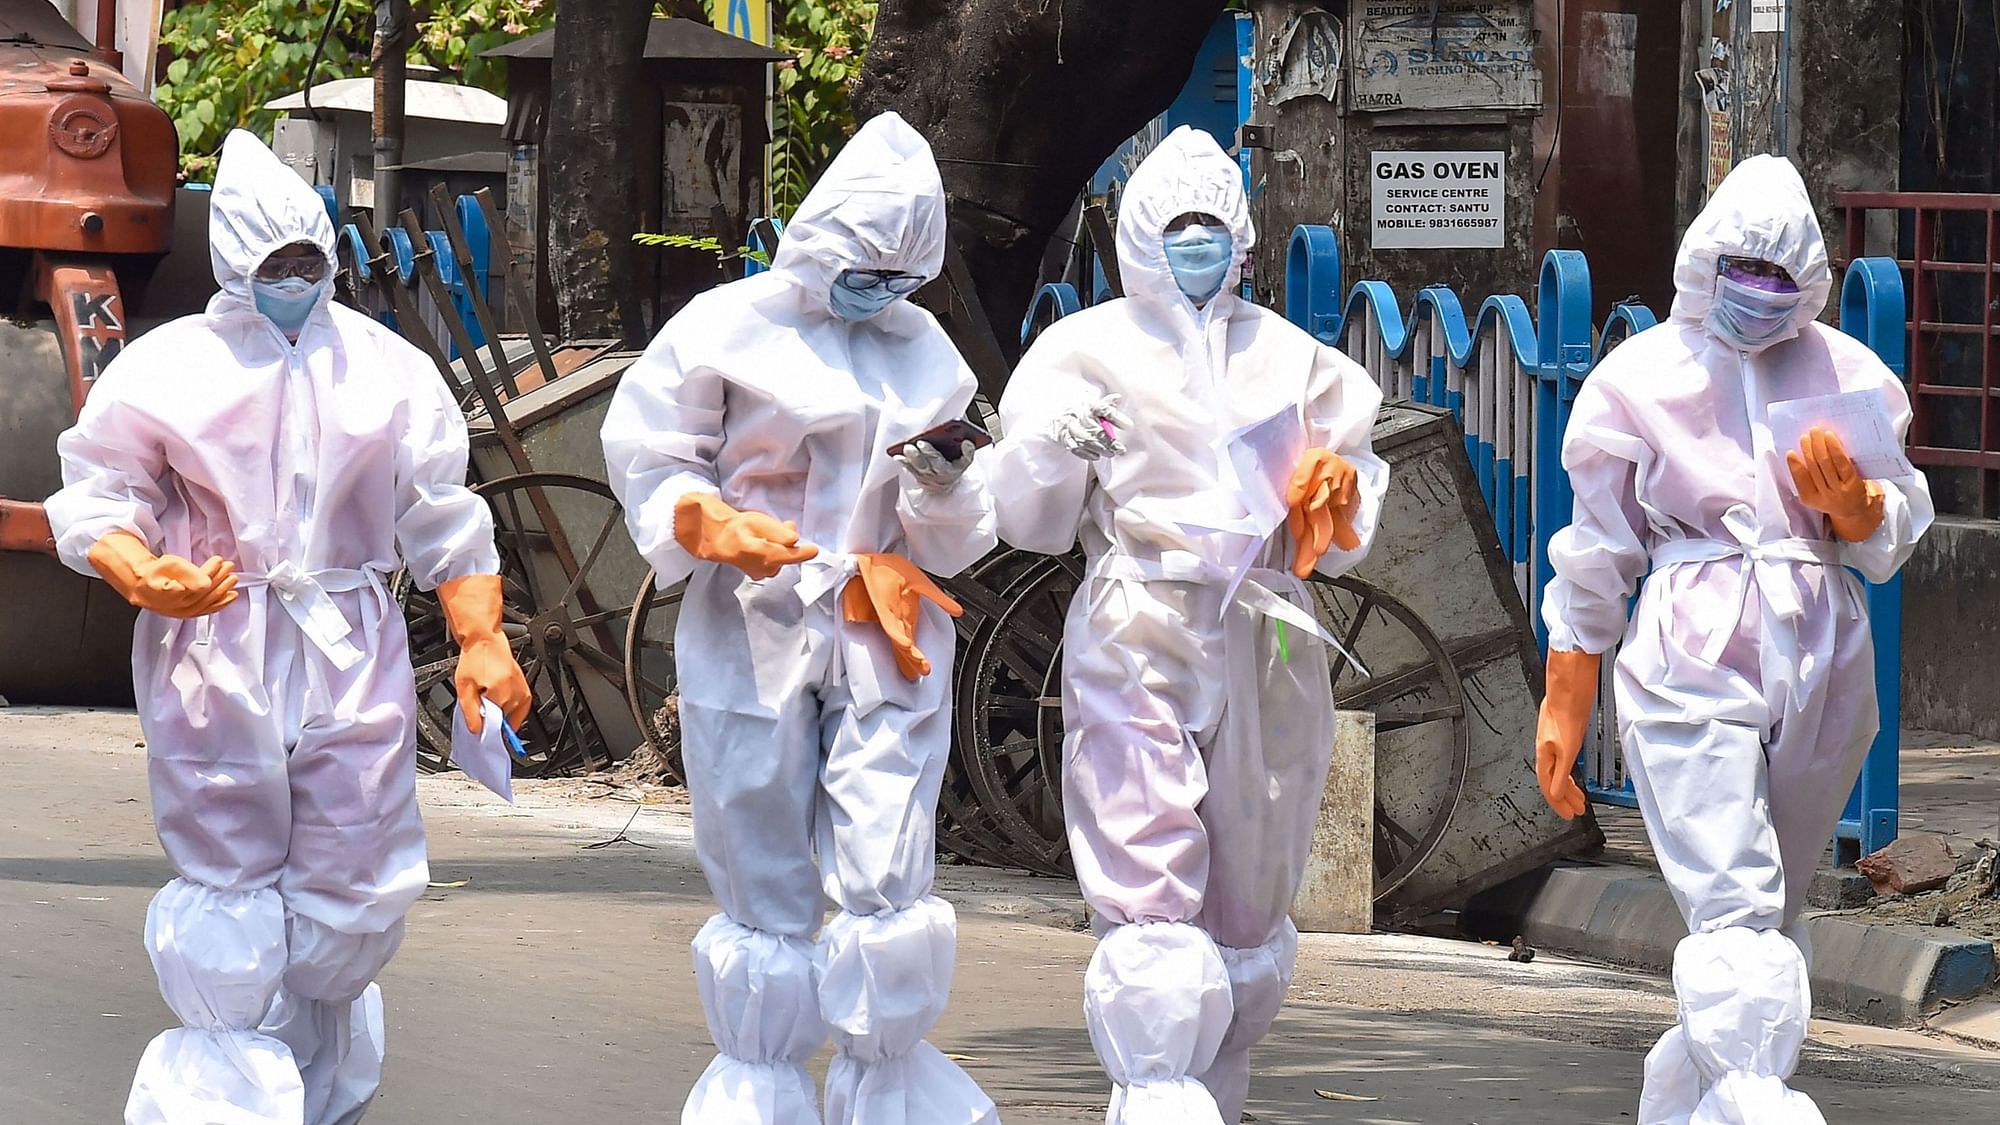 Health workers wearing protective suits walk on a street during their door-to-door survey to detect COVID-19 positive cases in Kolkata (Image for representation).